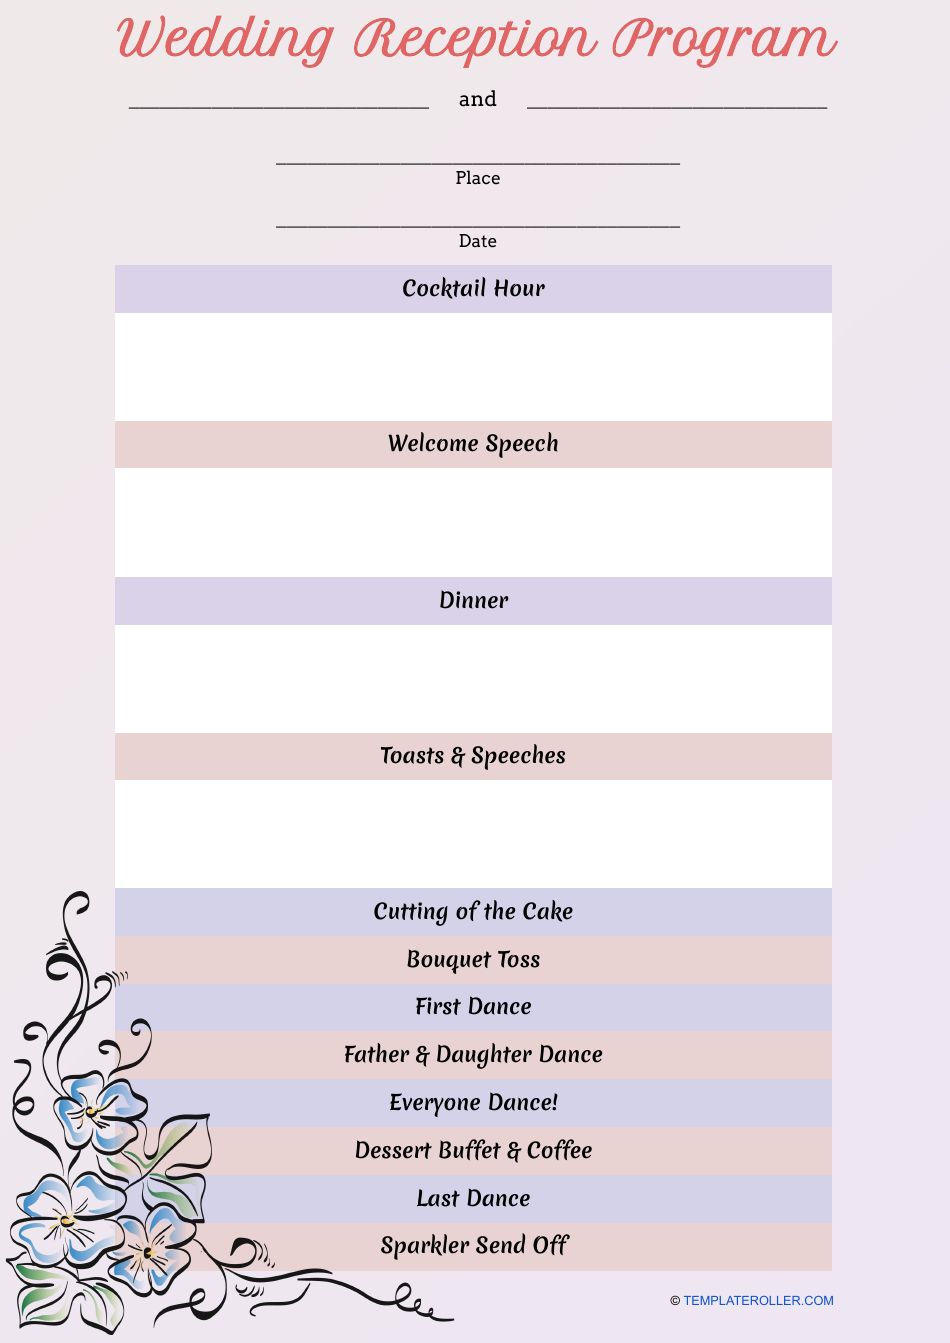 Wedding reception program template - A stylish and customizable program template for a memorable wedding reception